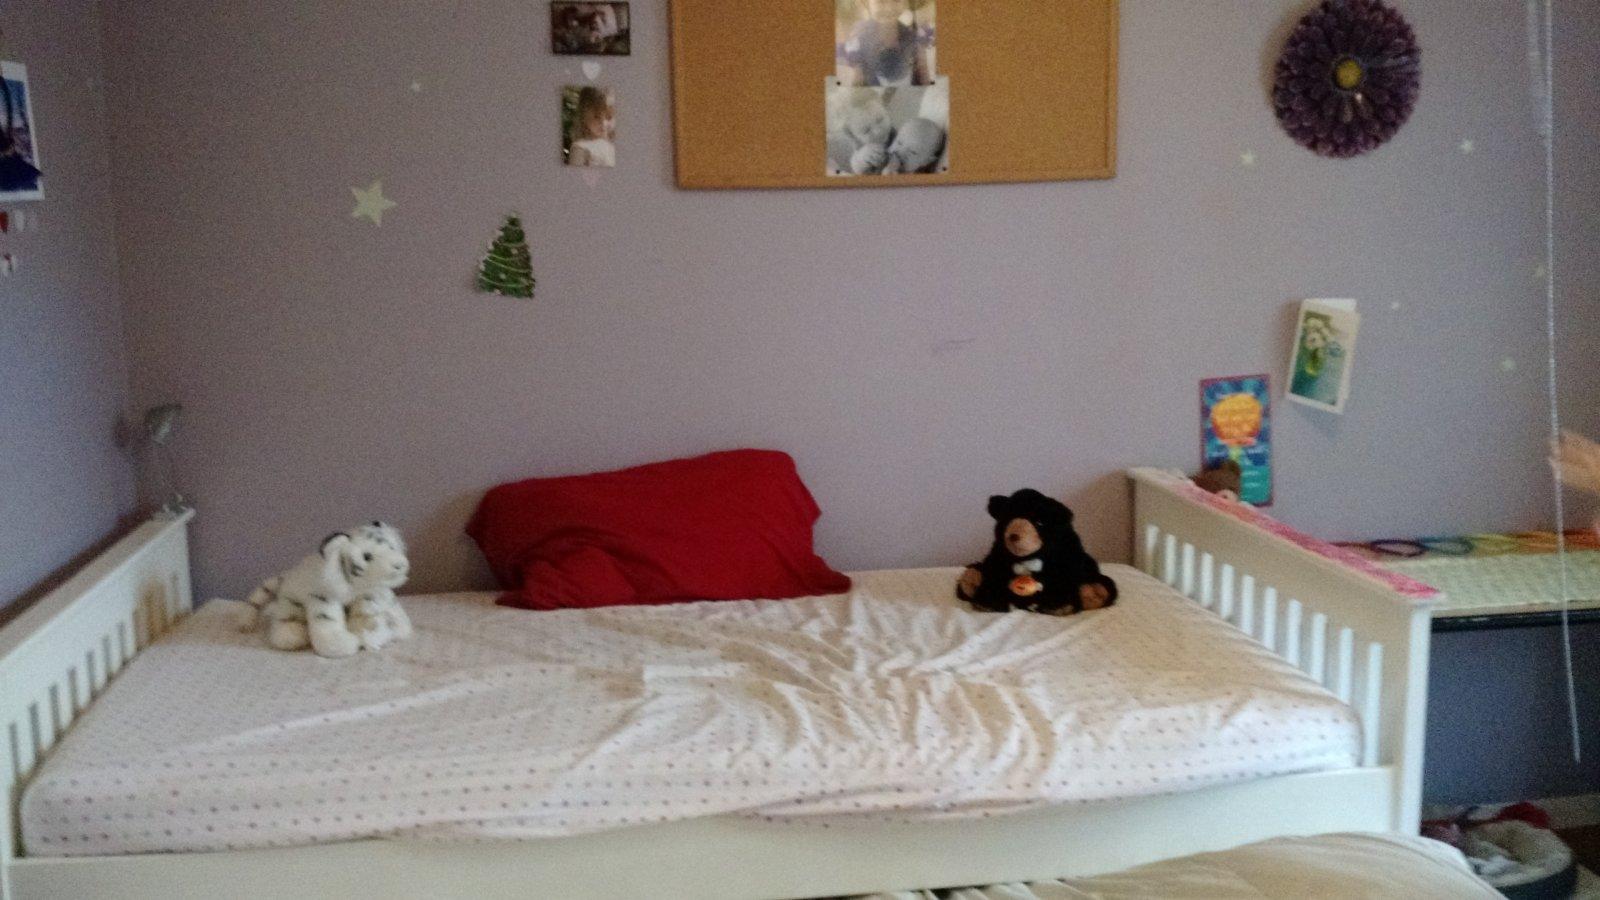 Her upper bed with stuffed animals ready to welcome one of their kind.